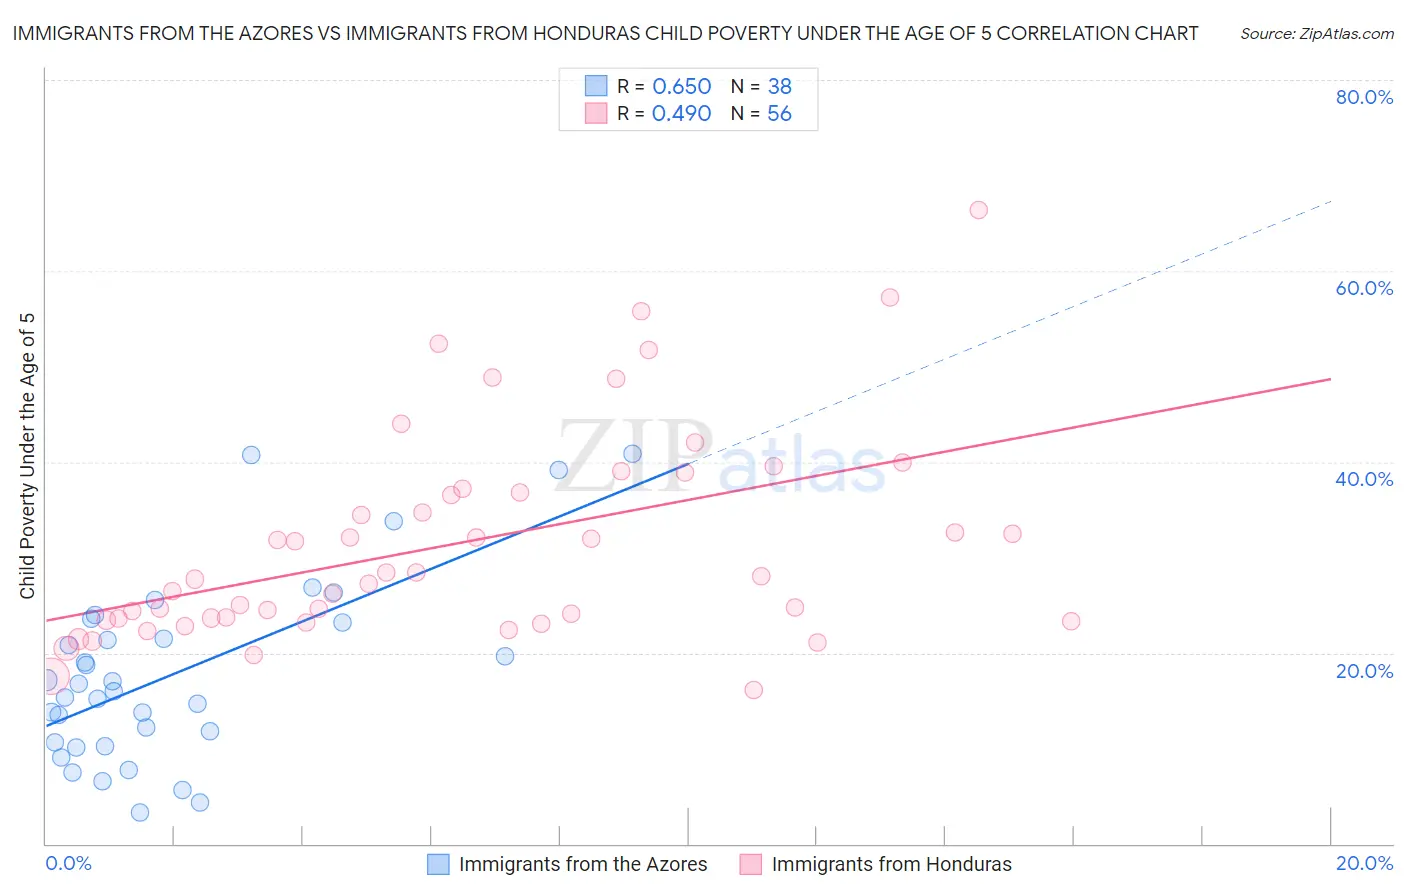 Immigrants from the Azores vs Immigrants from Honduras Child Poverty Under the Age of 5